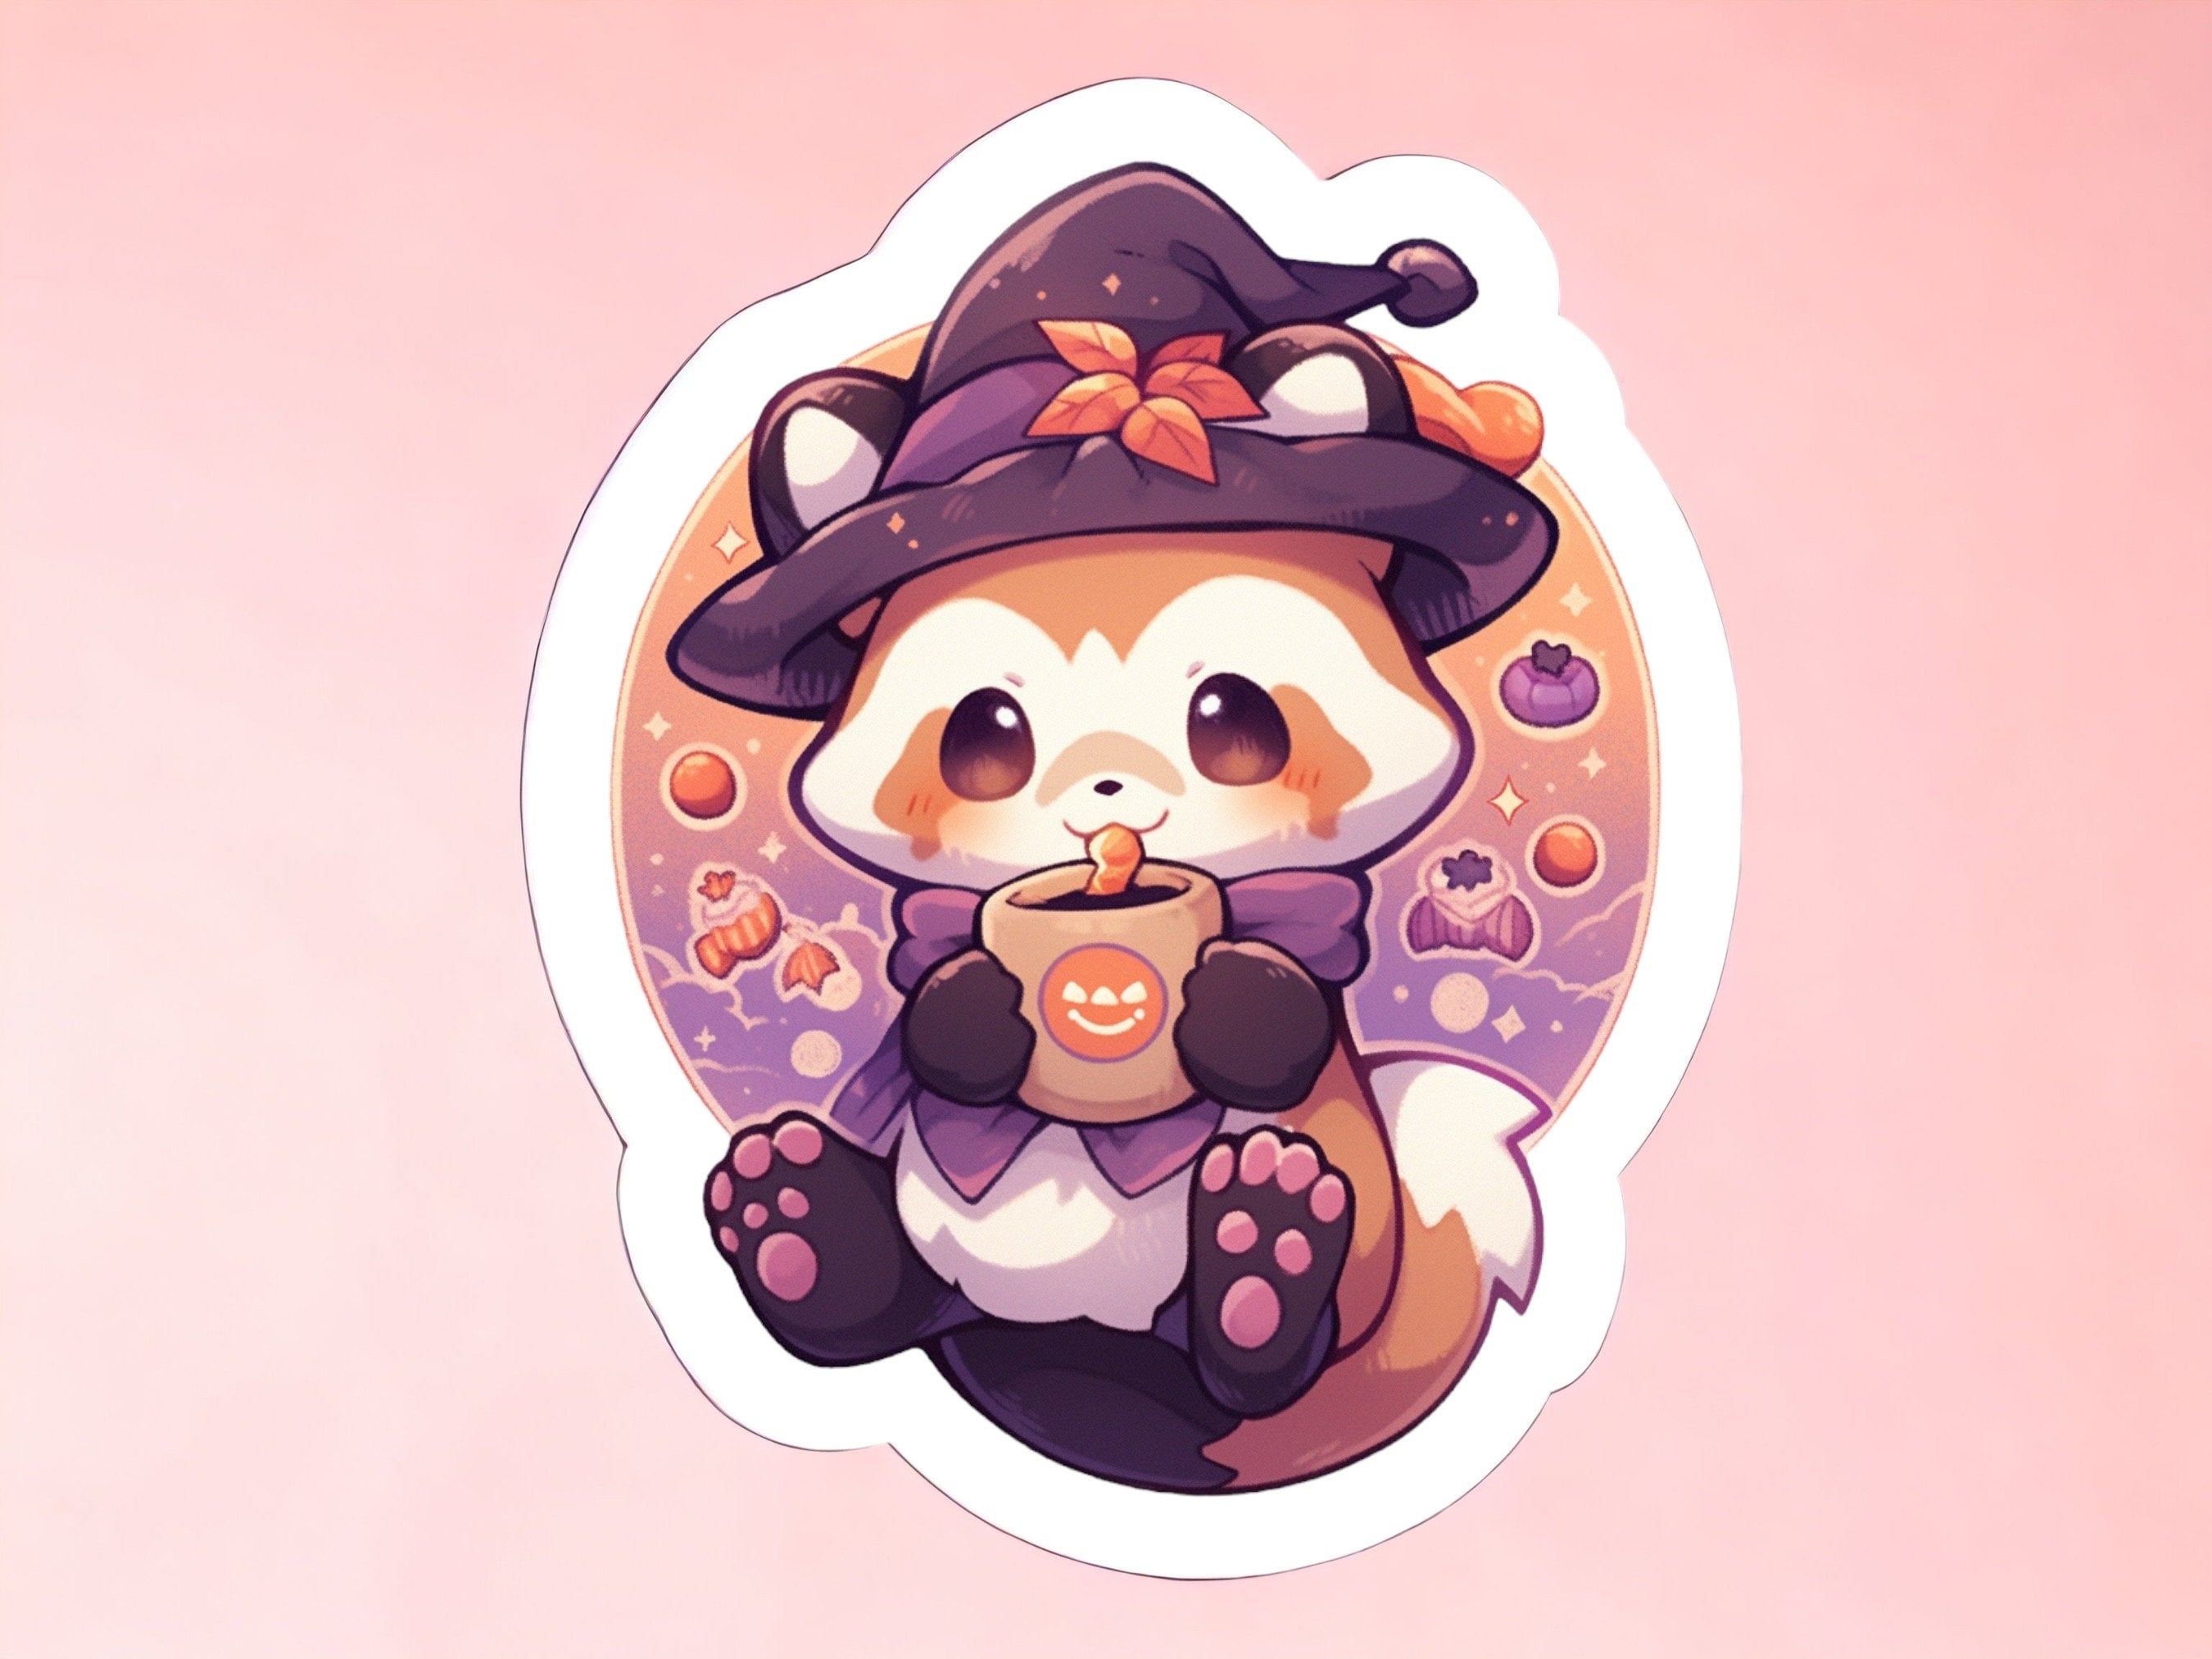 Red panda Sticker Spooky Witchy Coffee Kawaii Kindle Laptop sticker, Notebook, Journal sticker, Greeting Card